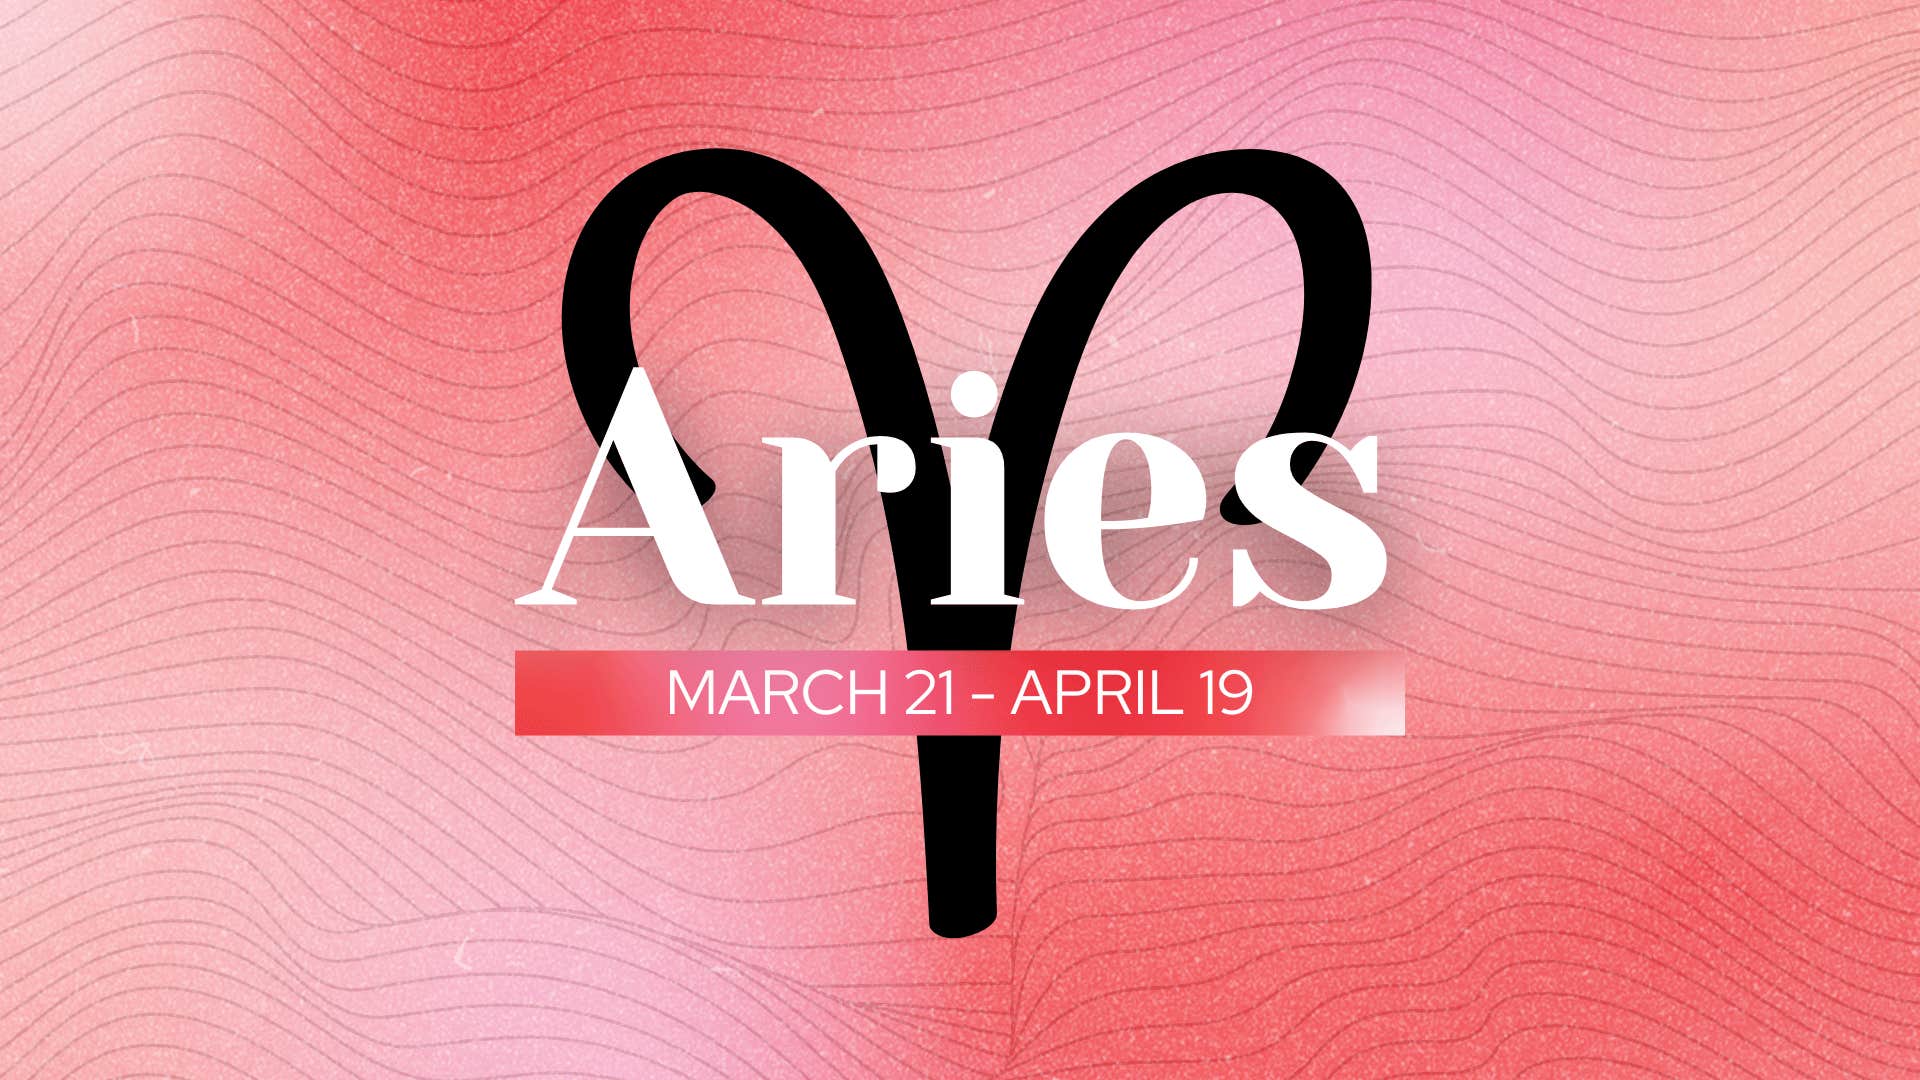 what makes aries uniquely special